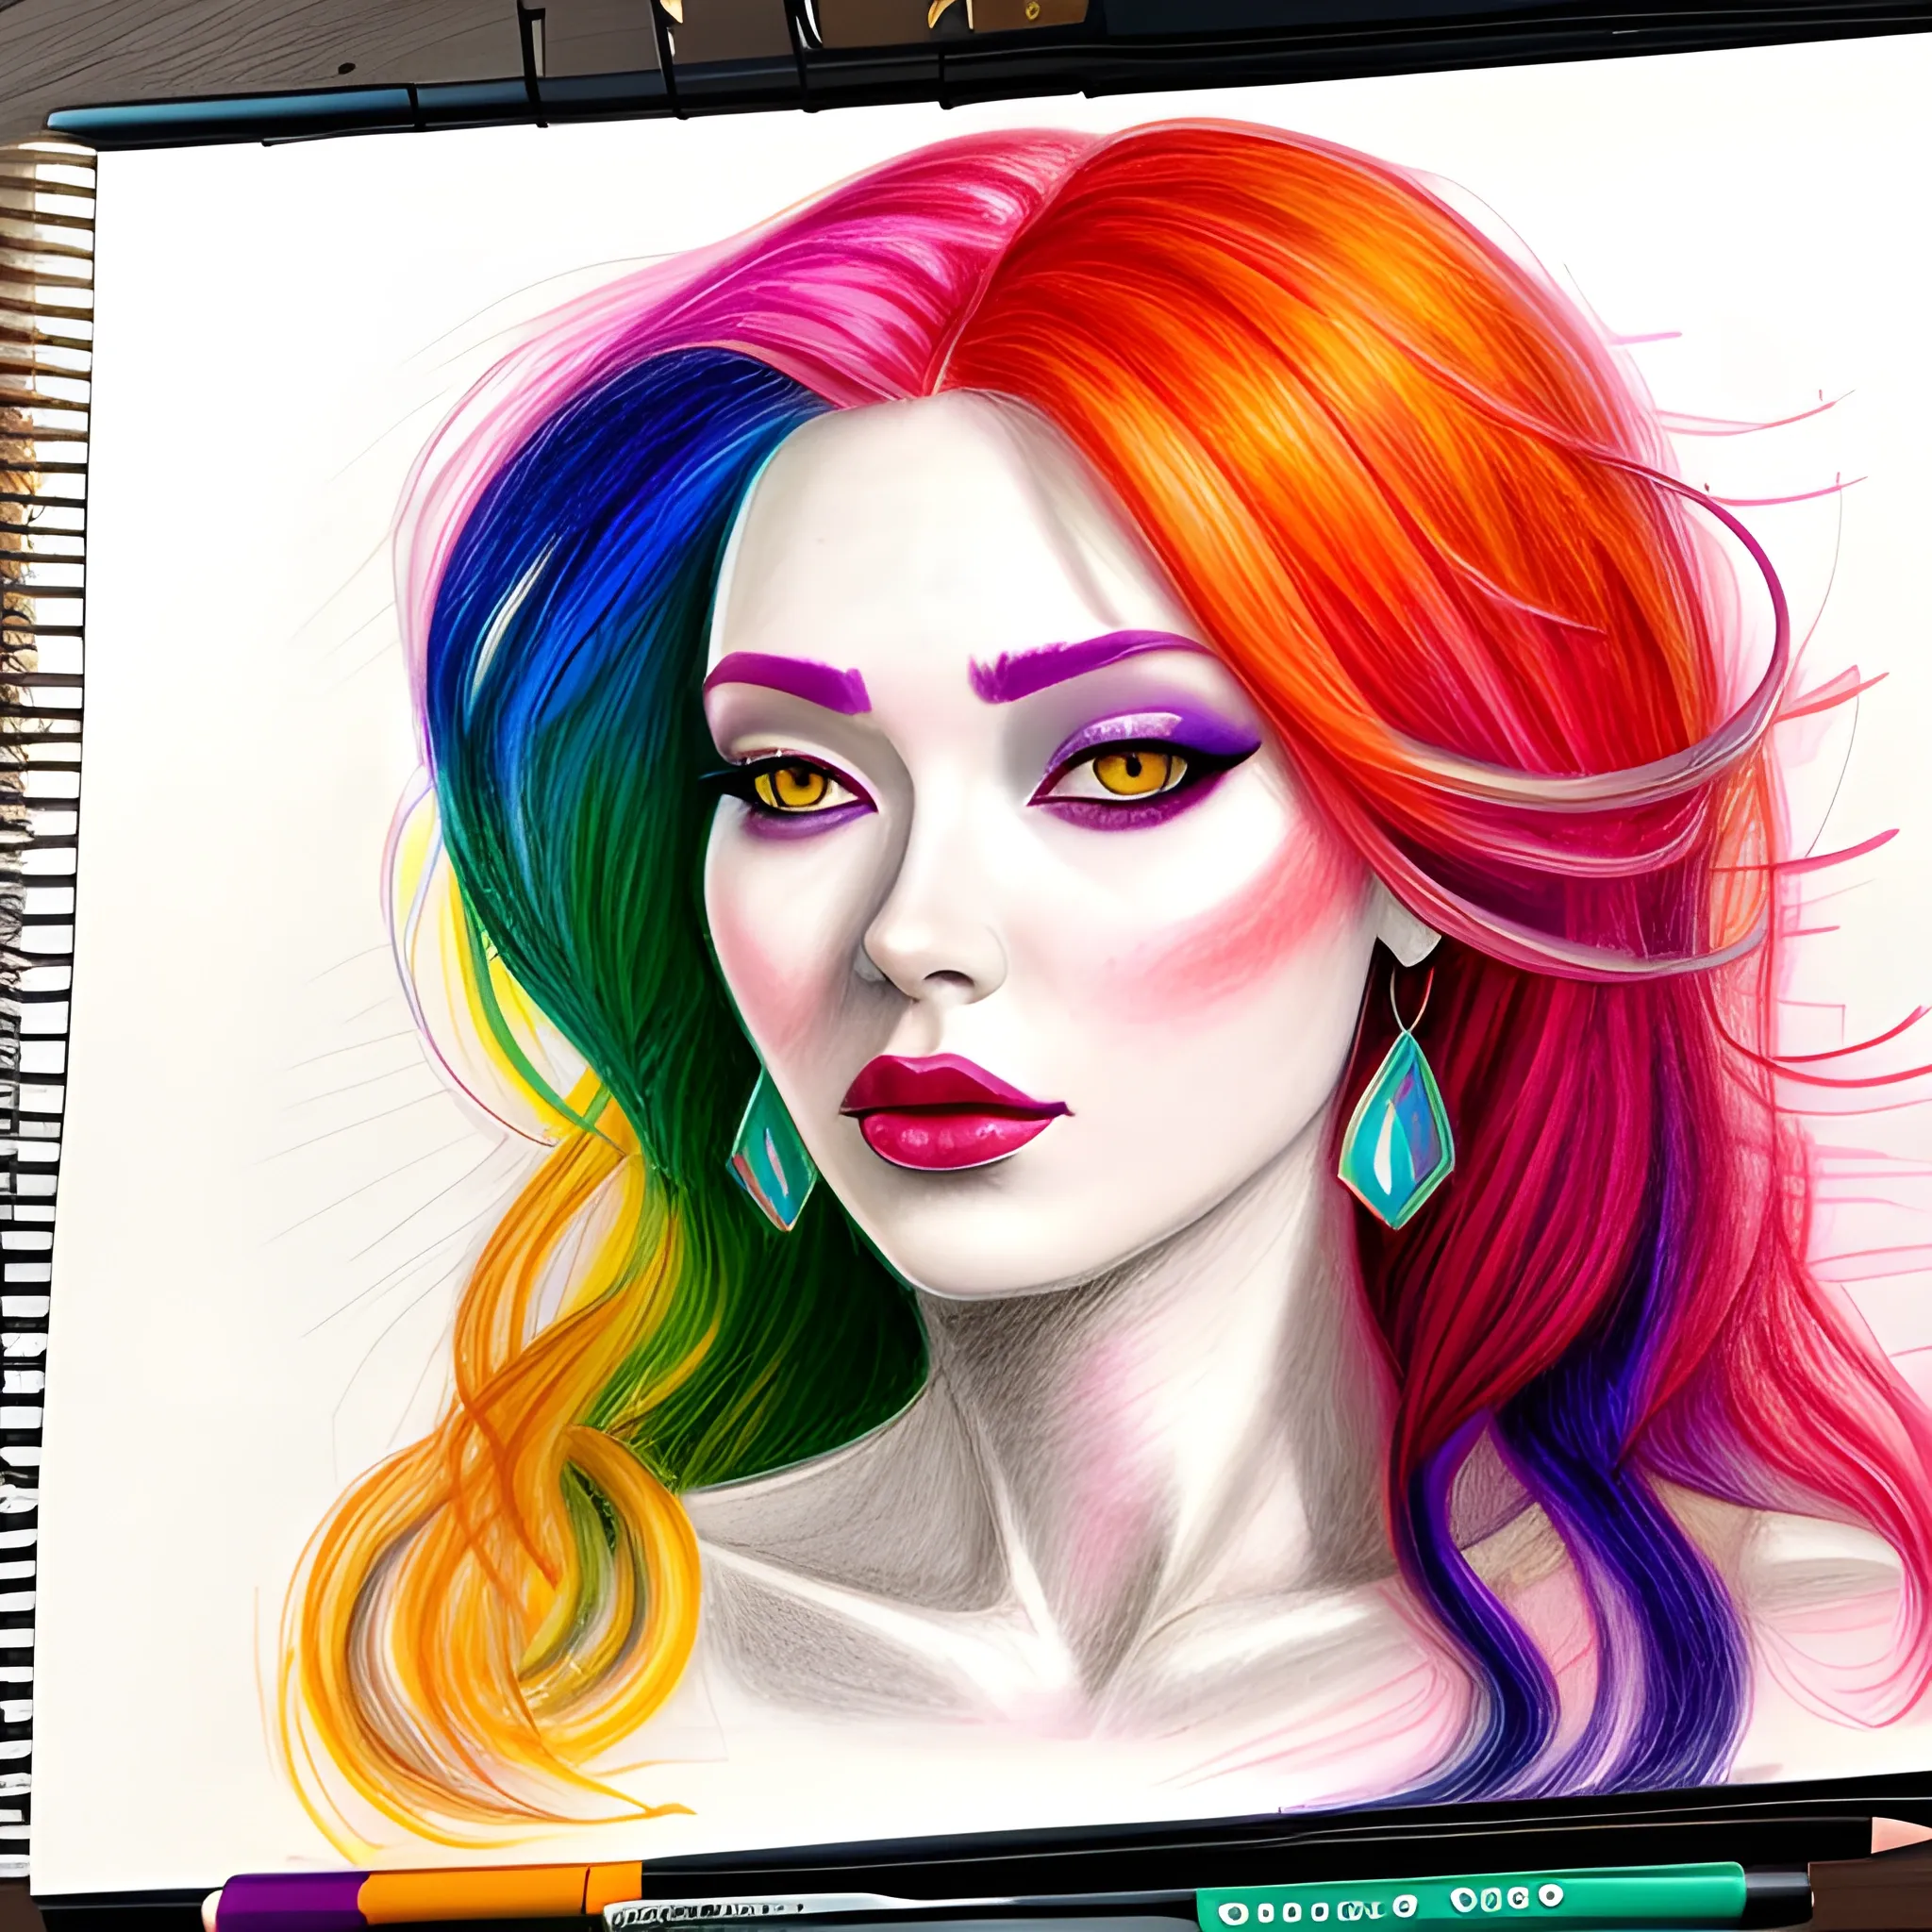 the woman is wearing multicolored hair, vibrant color scheme, Pencil Sketch